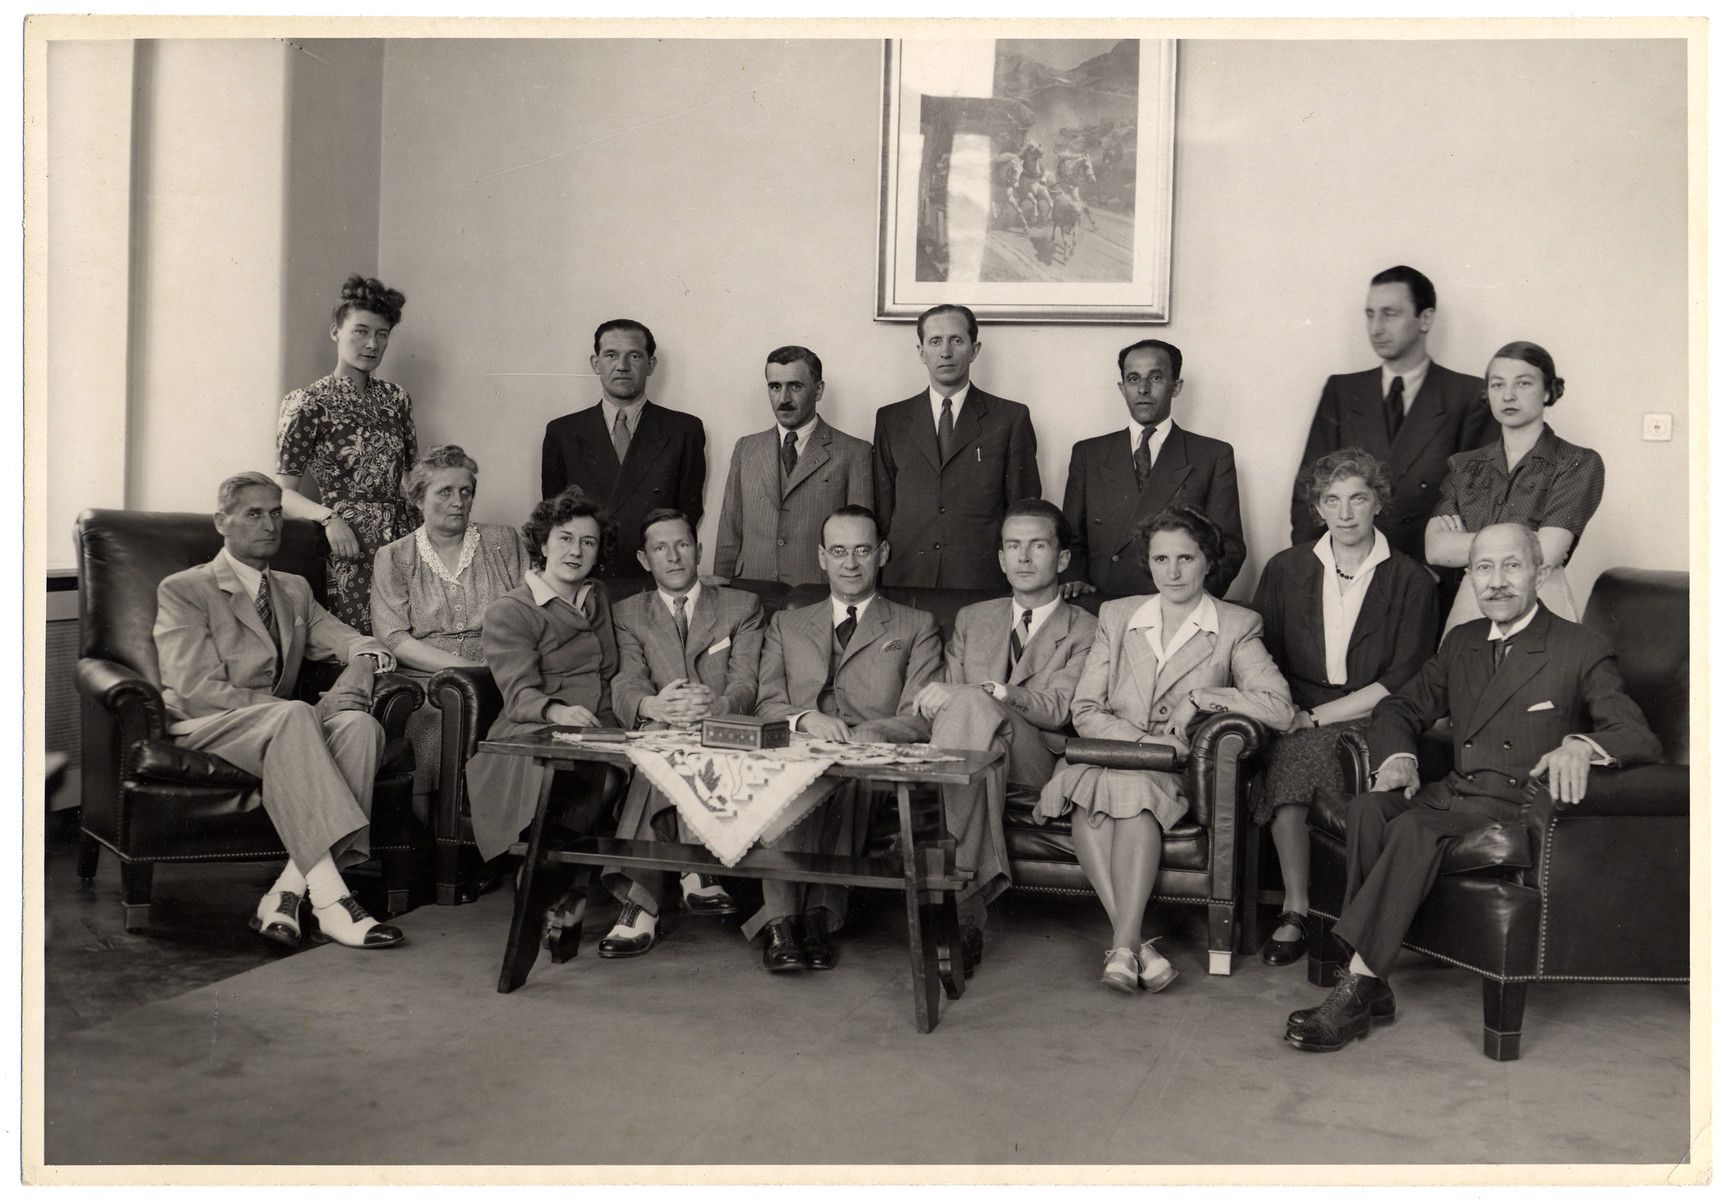 Group portrait of the Swiss consulate staff in Budapest.  Seated in the center is the Consul General, Carl Lutz.

Standing behind Mr.Lutz is his chauffeur Charles Szluha.
Seated on the left is Mr. Steiner.